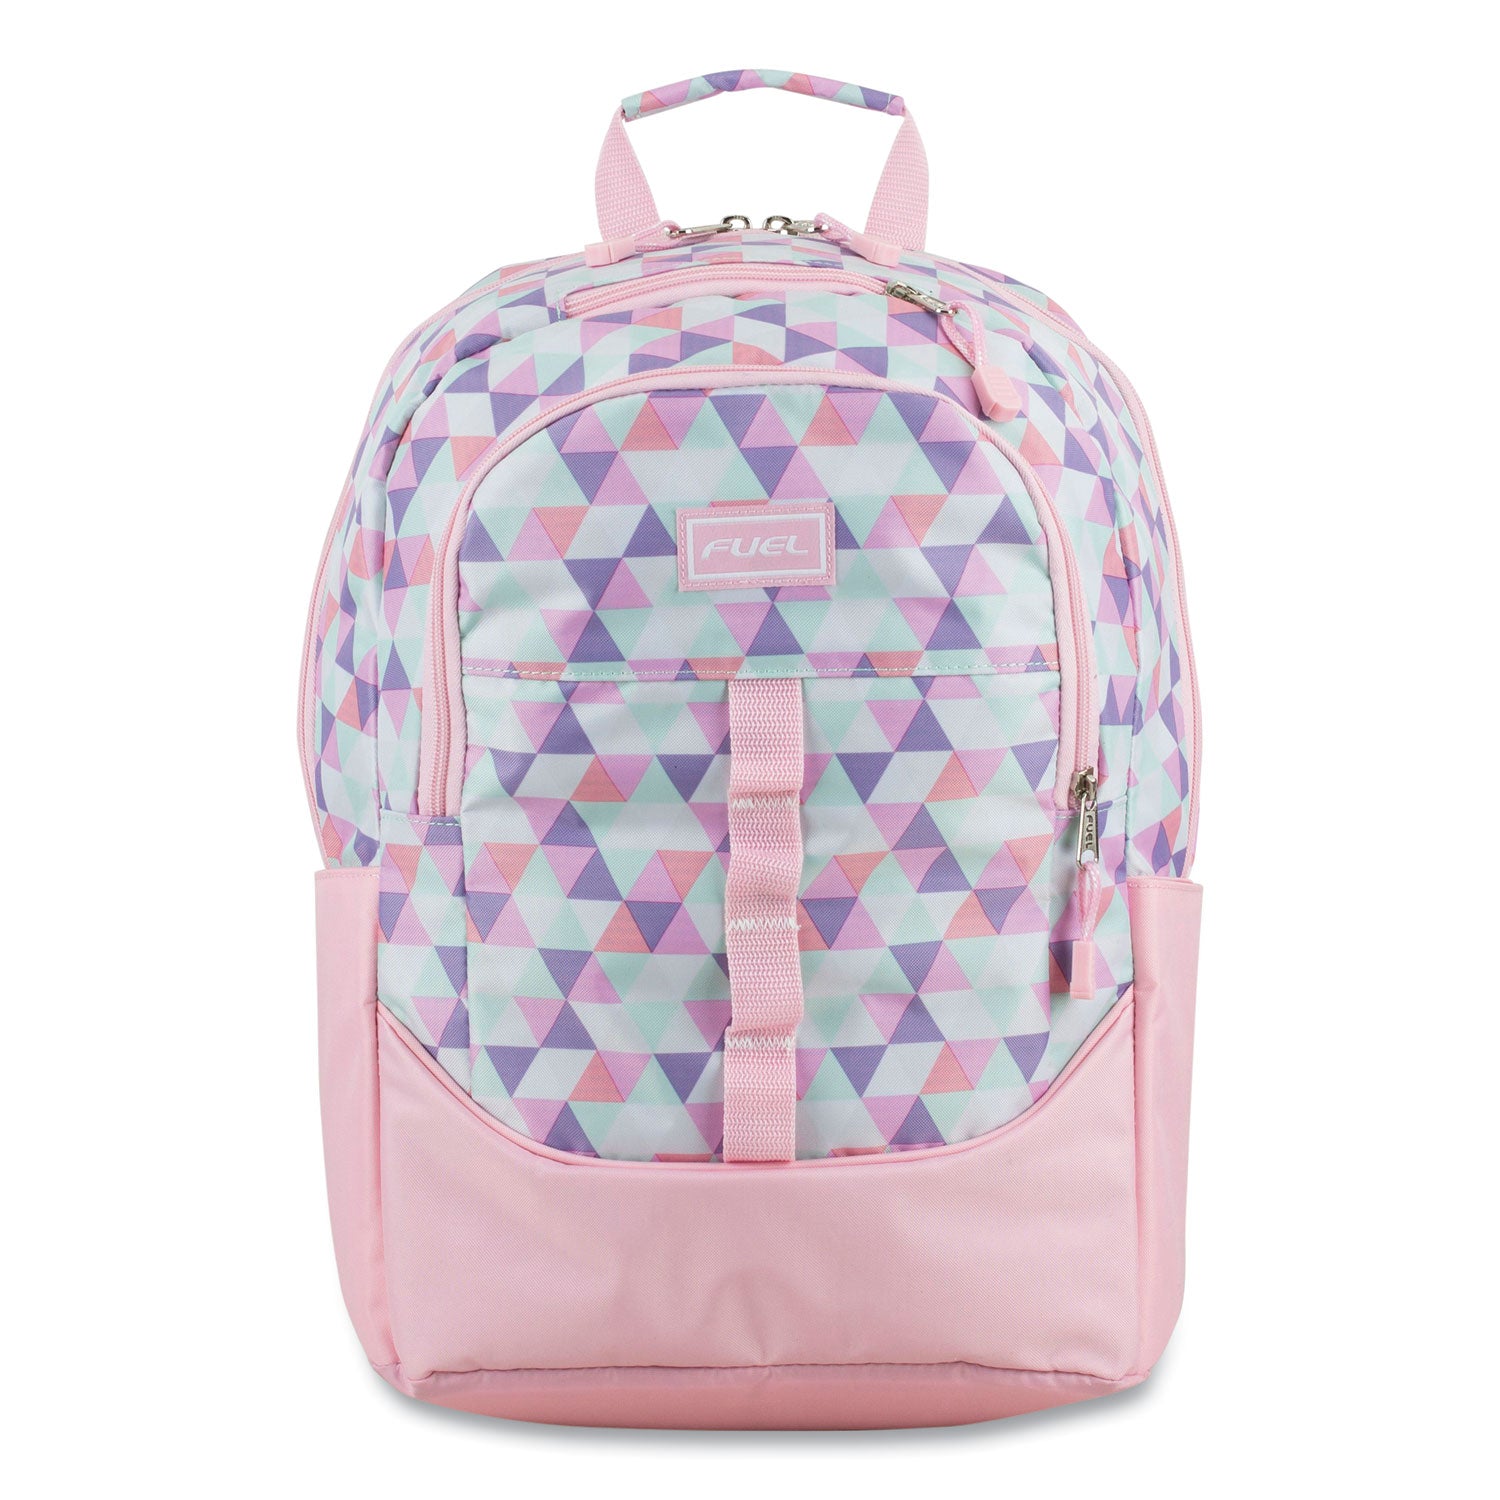 geometric-backpack-fits-device-up-to-159-125-x-763-x-18-pink-purple_fue119250stcl6 - 1